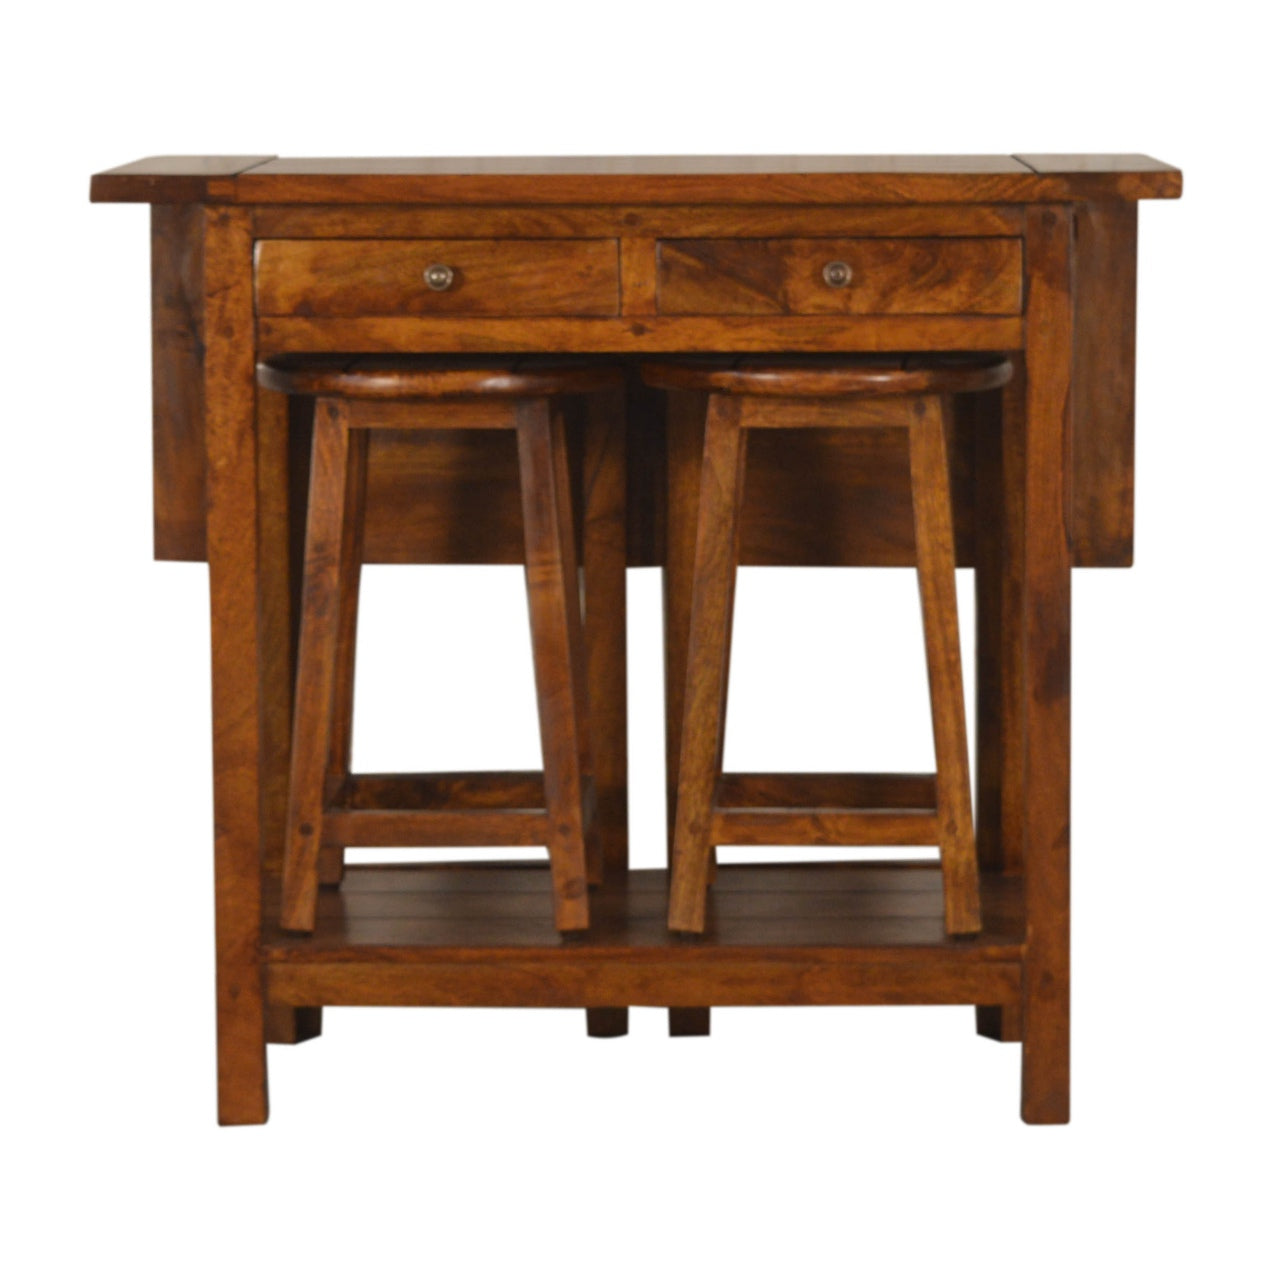 Chestnut Breakfast Wooden Table With 2 Stools